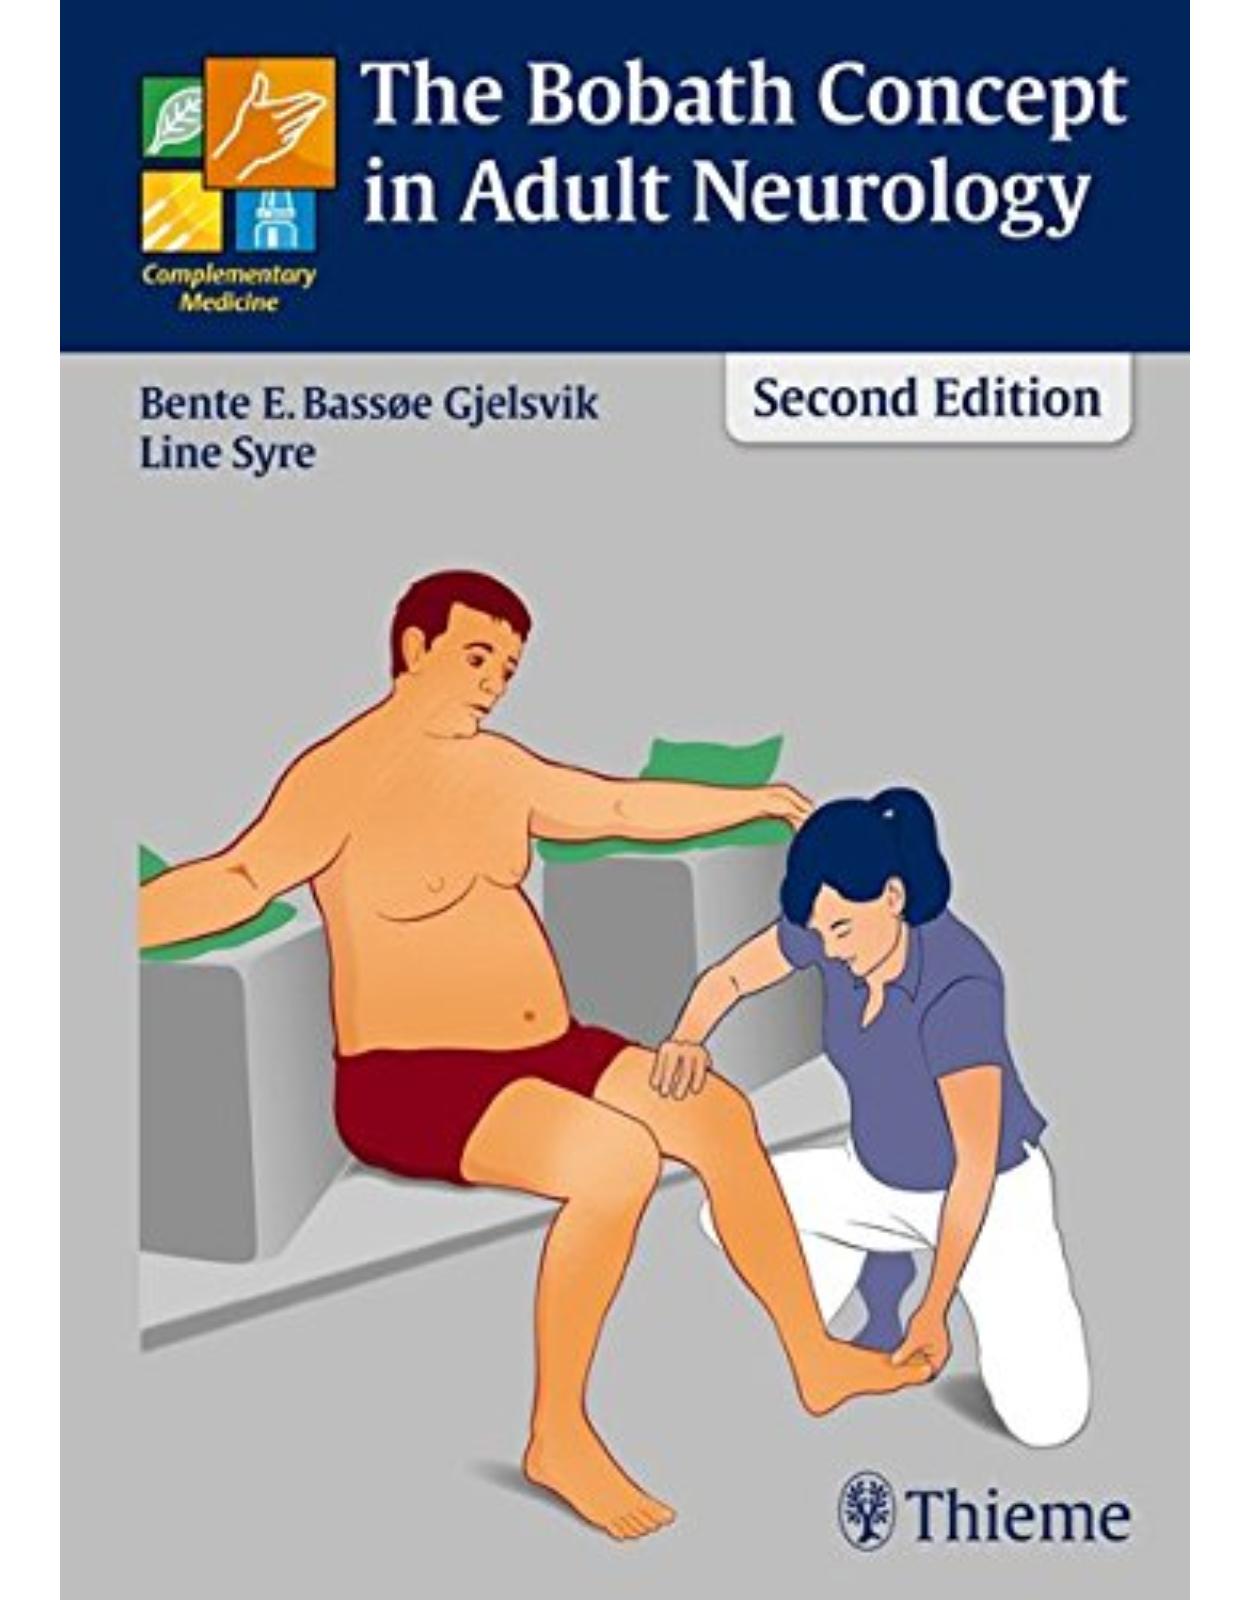 The Bobath Concept in Adult Neurology